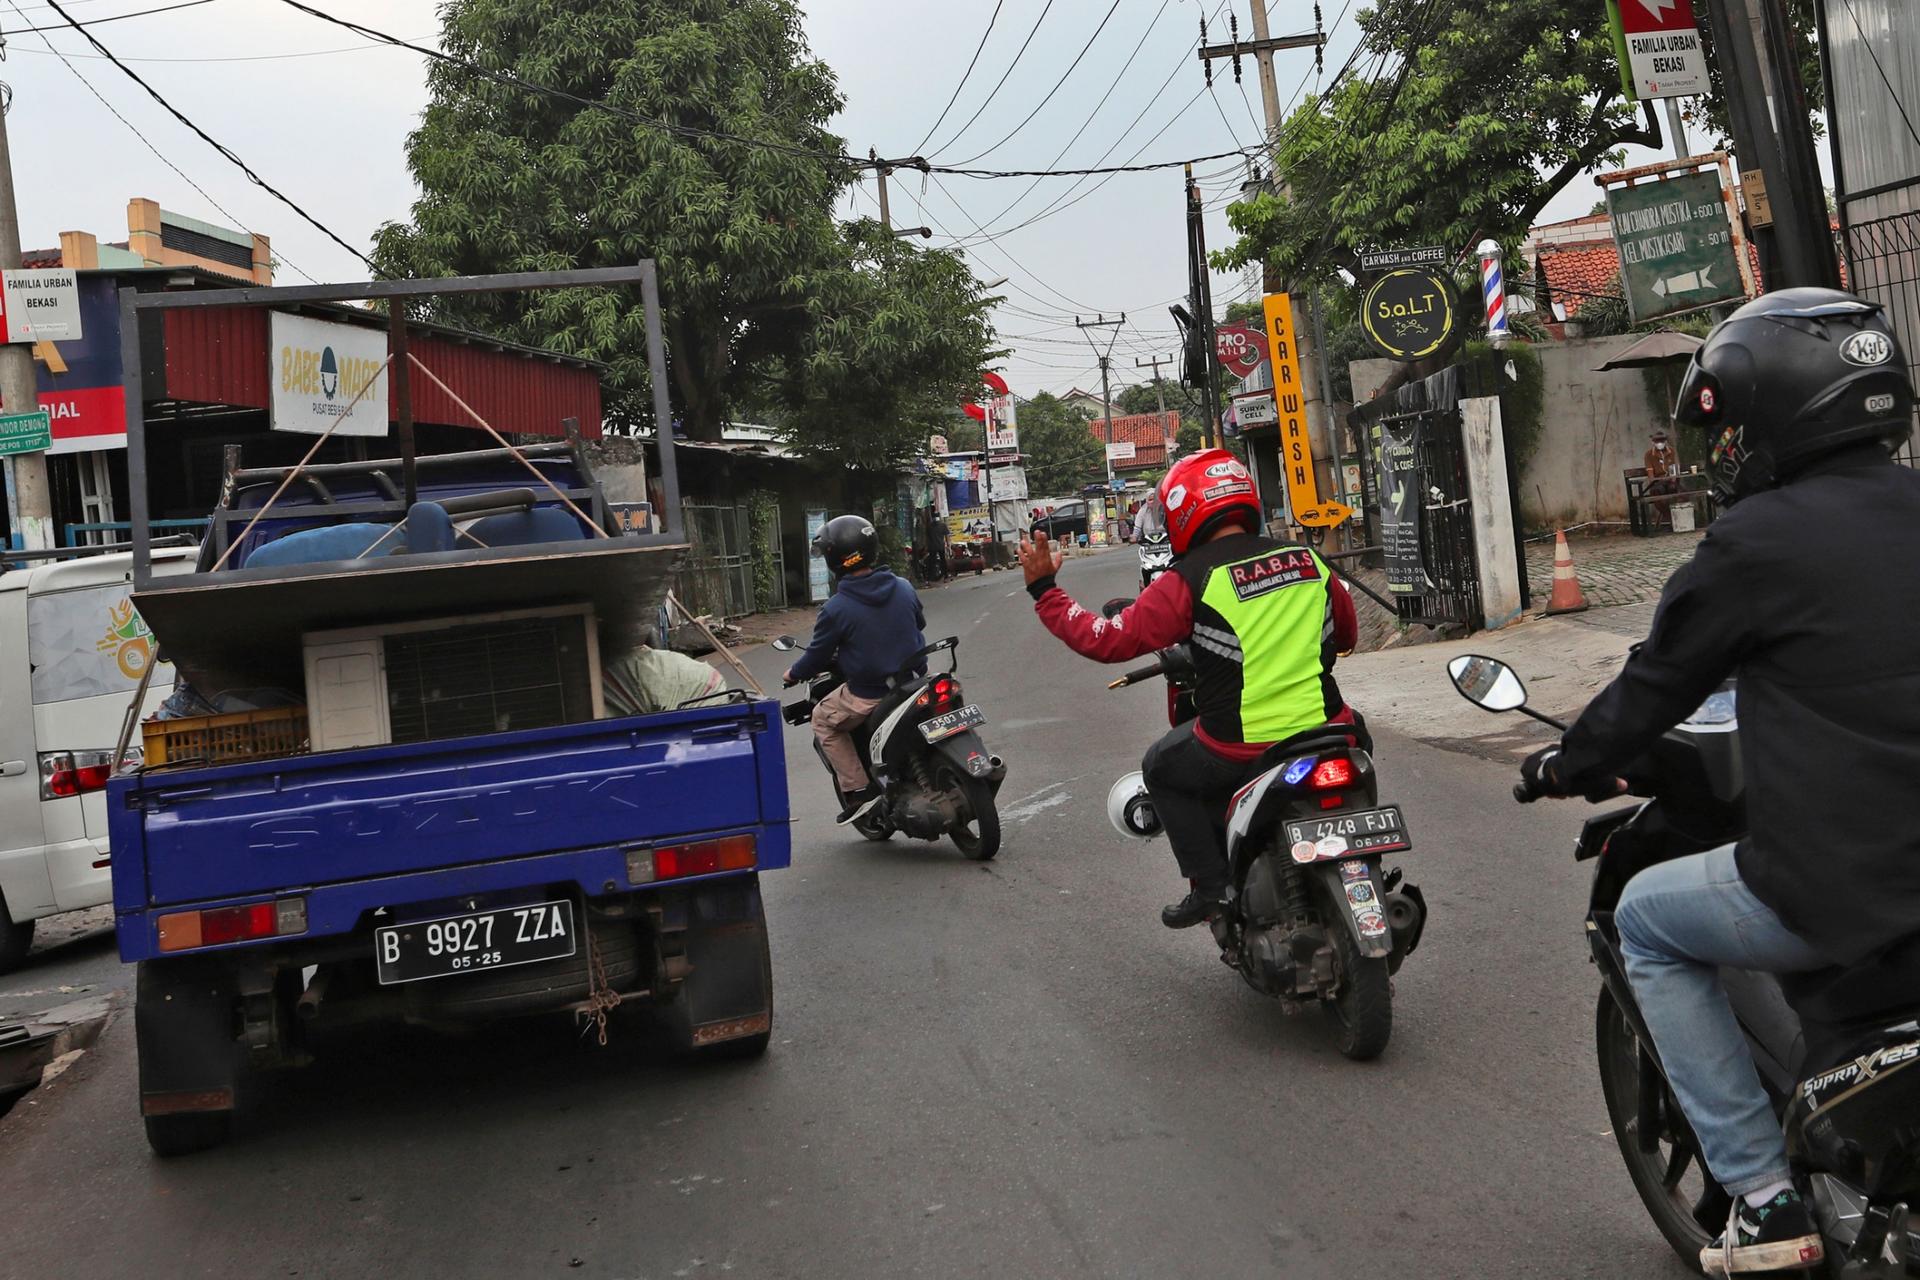 Three people on motorbikes are shown with one holding his hand up to a truck to clear the road for an ambulance.